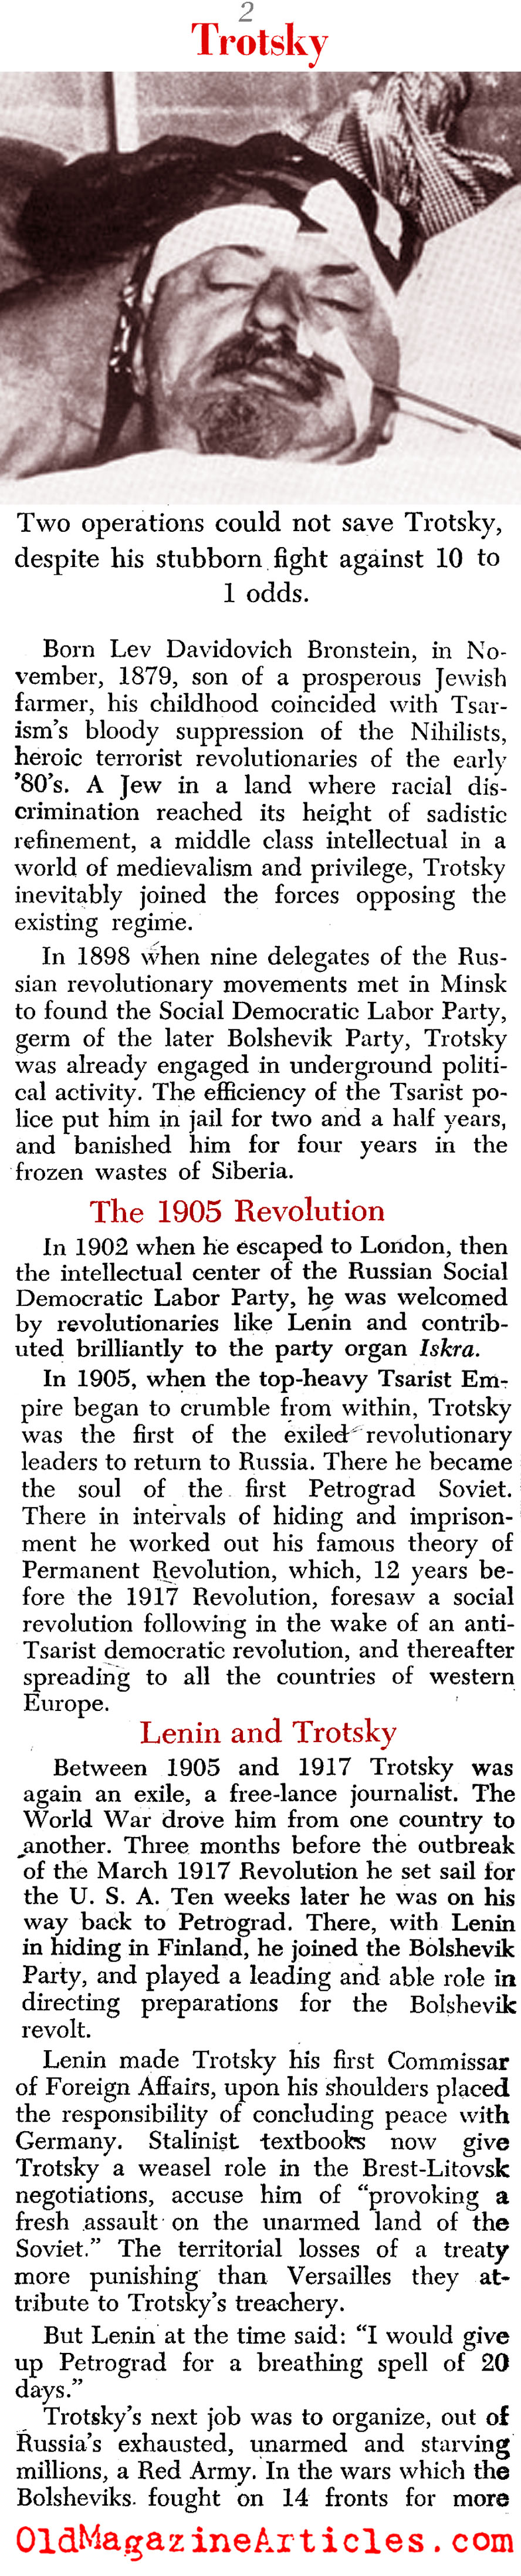 The Life and Death of Trotsky (PM Tabloid, 1940)